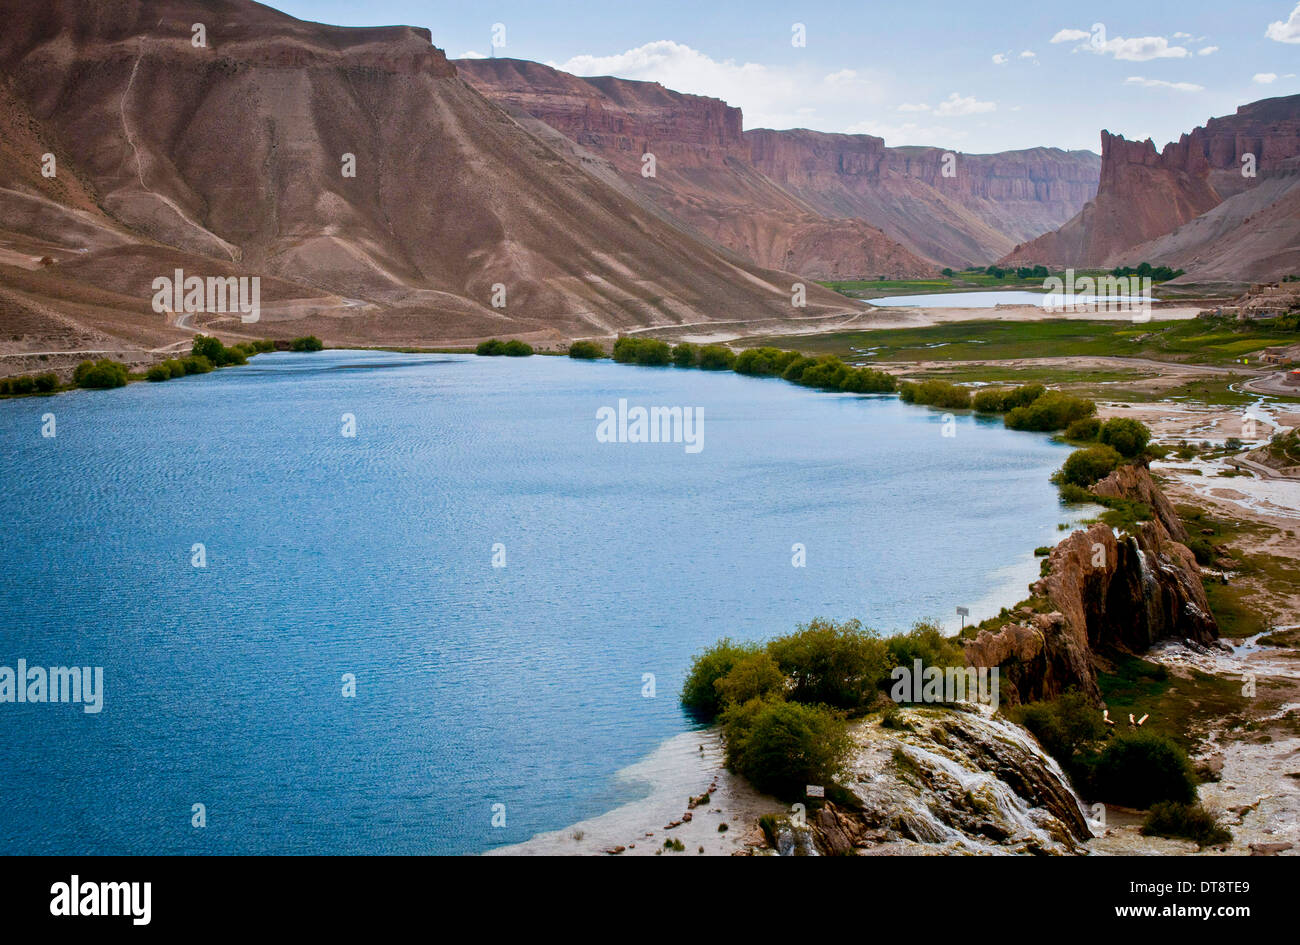 View of the lakes at the Band-e-Amir National Park June 27, 2012 in Bamyan, Afghanistan. The lakes were created by natural dams of travertine and is known as Afghanistan's Grand Canyon. Stock Photo